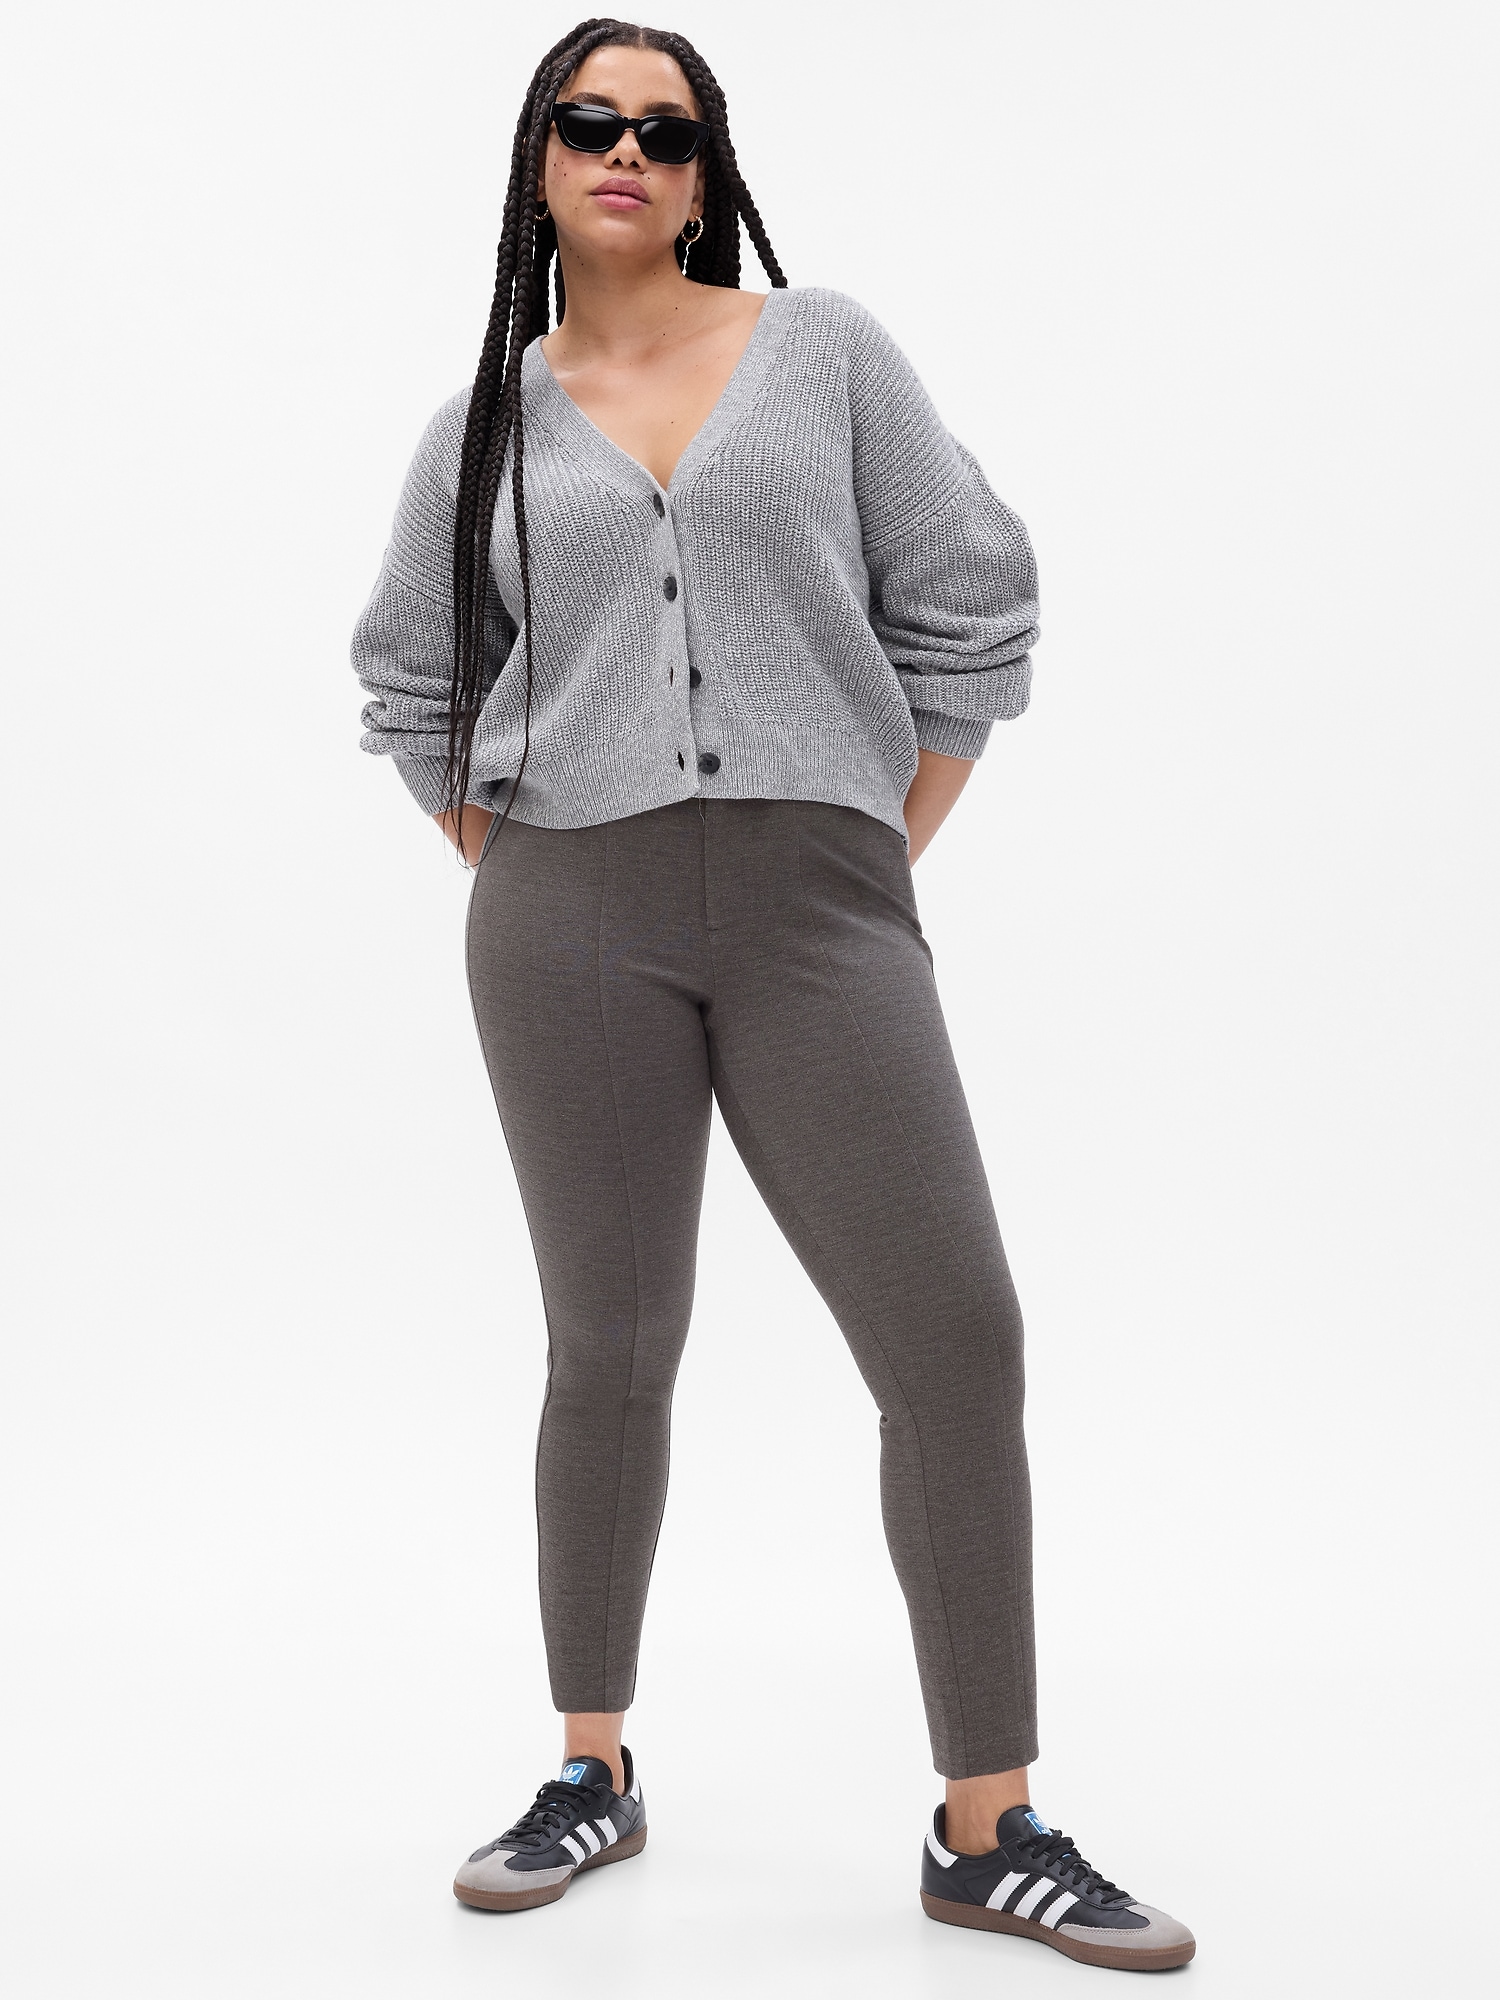 Buy Women's Solid Skinny Fit Ponte Pants with Zipper Pockets Online